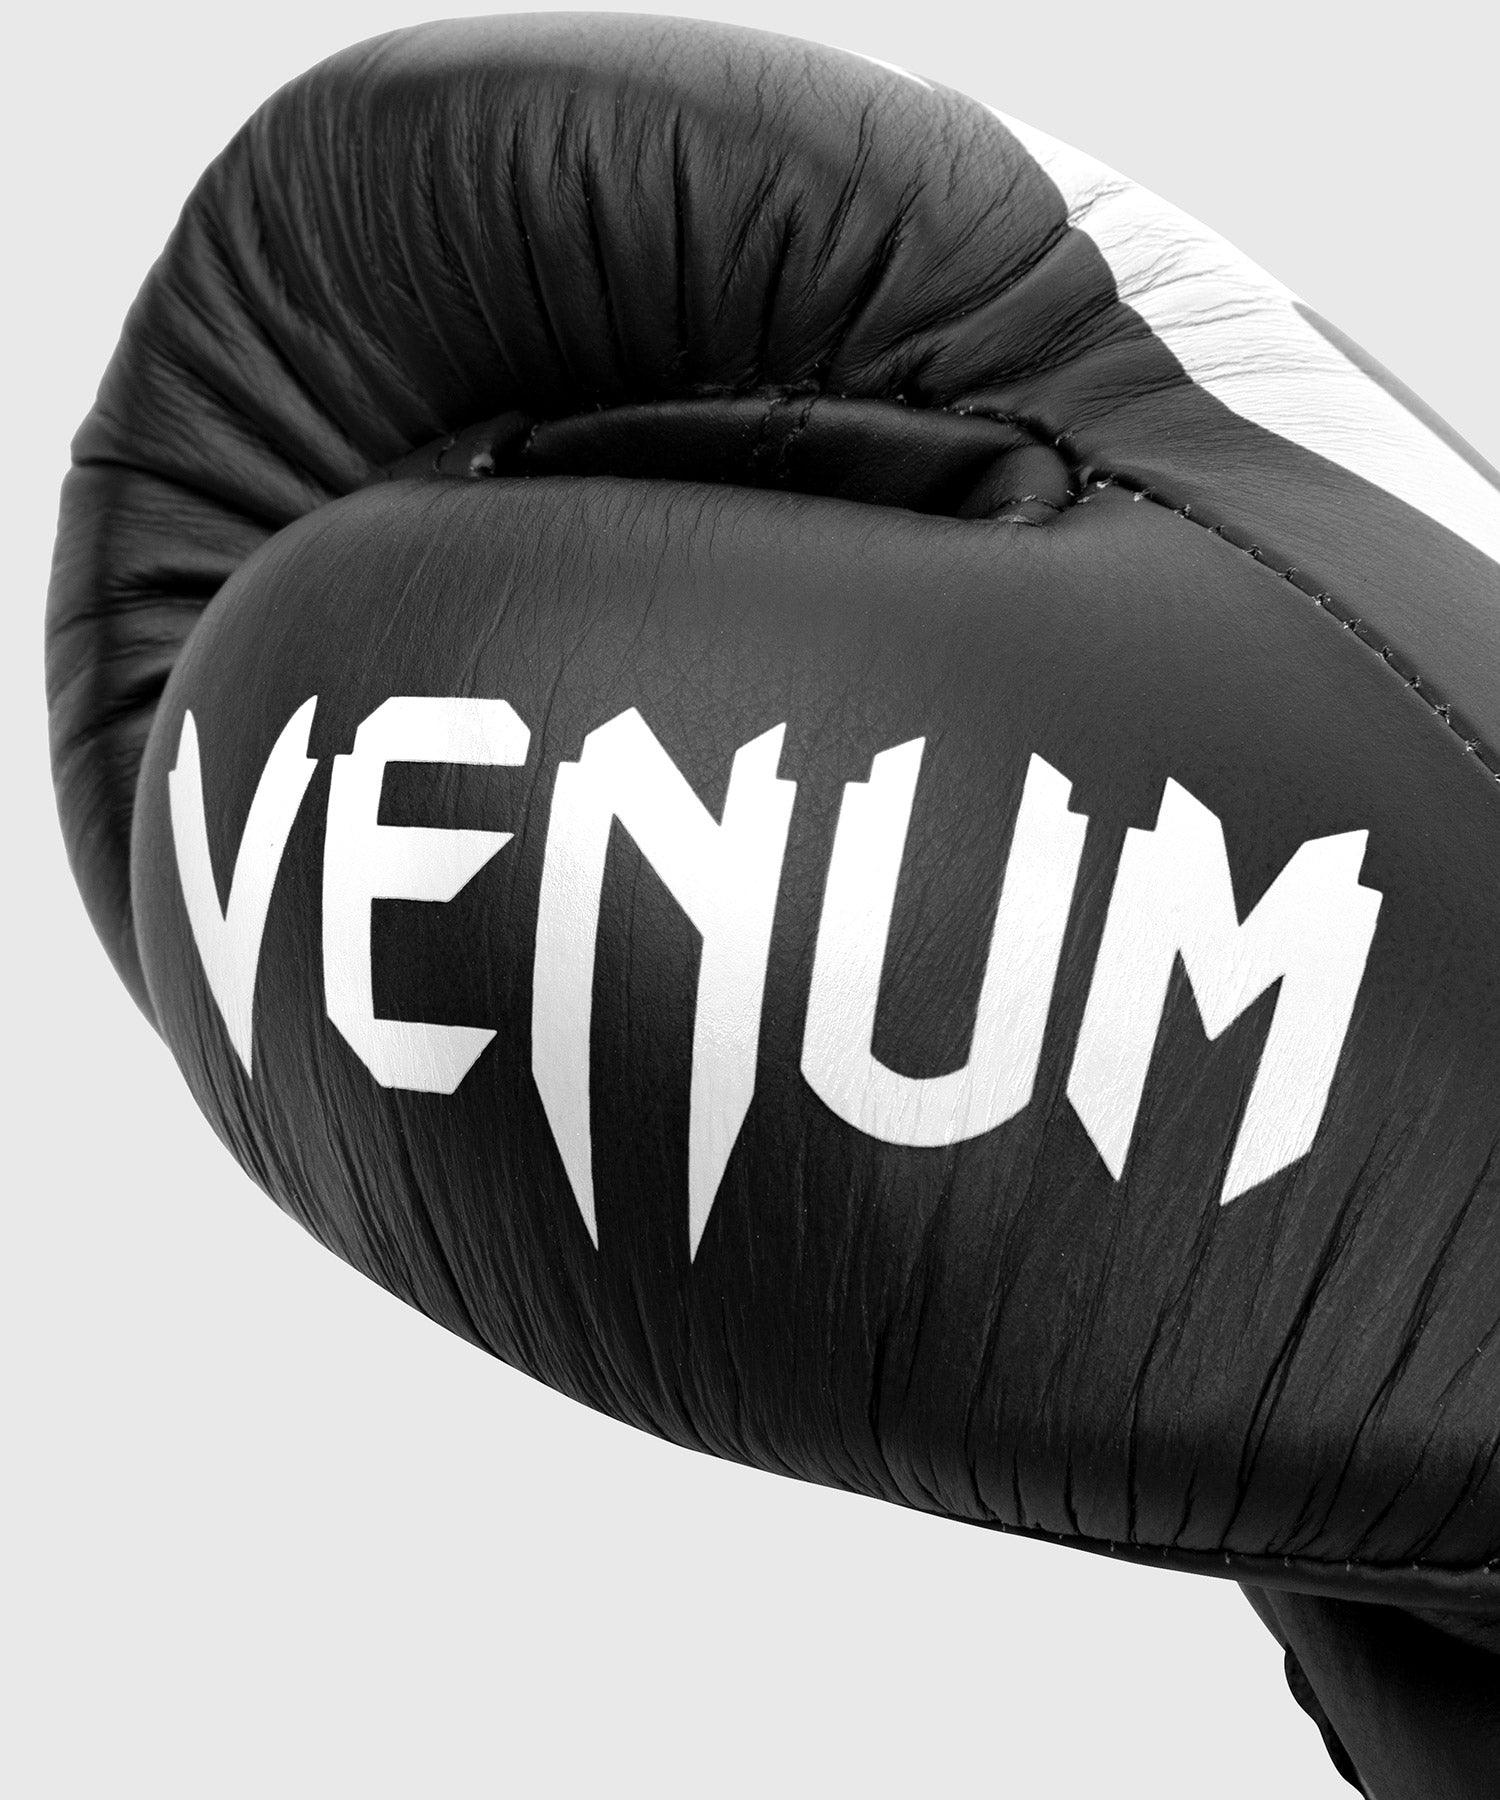 Venum Giant 2.0 Pro Boxing Gloves - With Laces - Black/White Picture 8